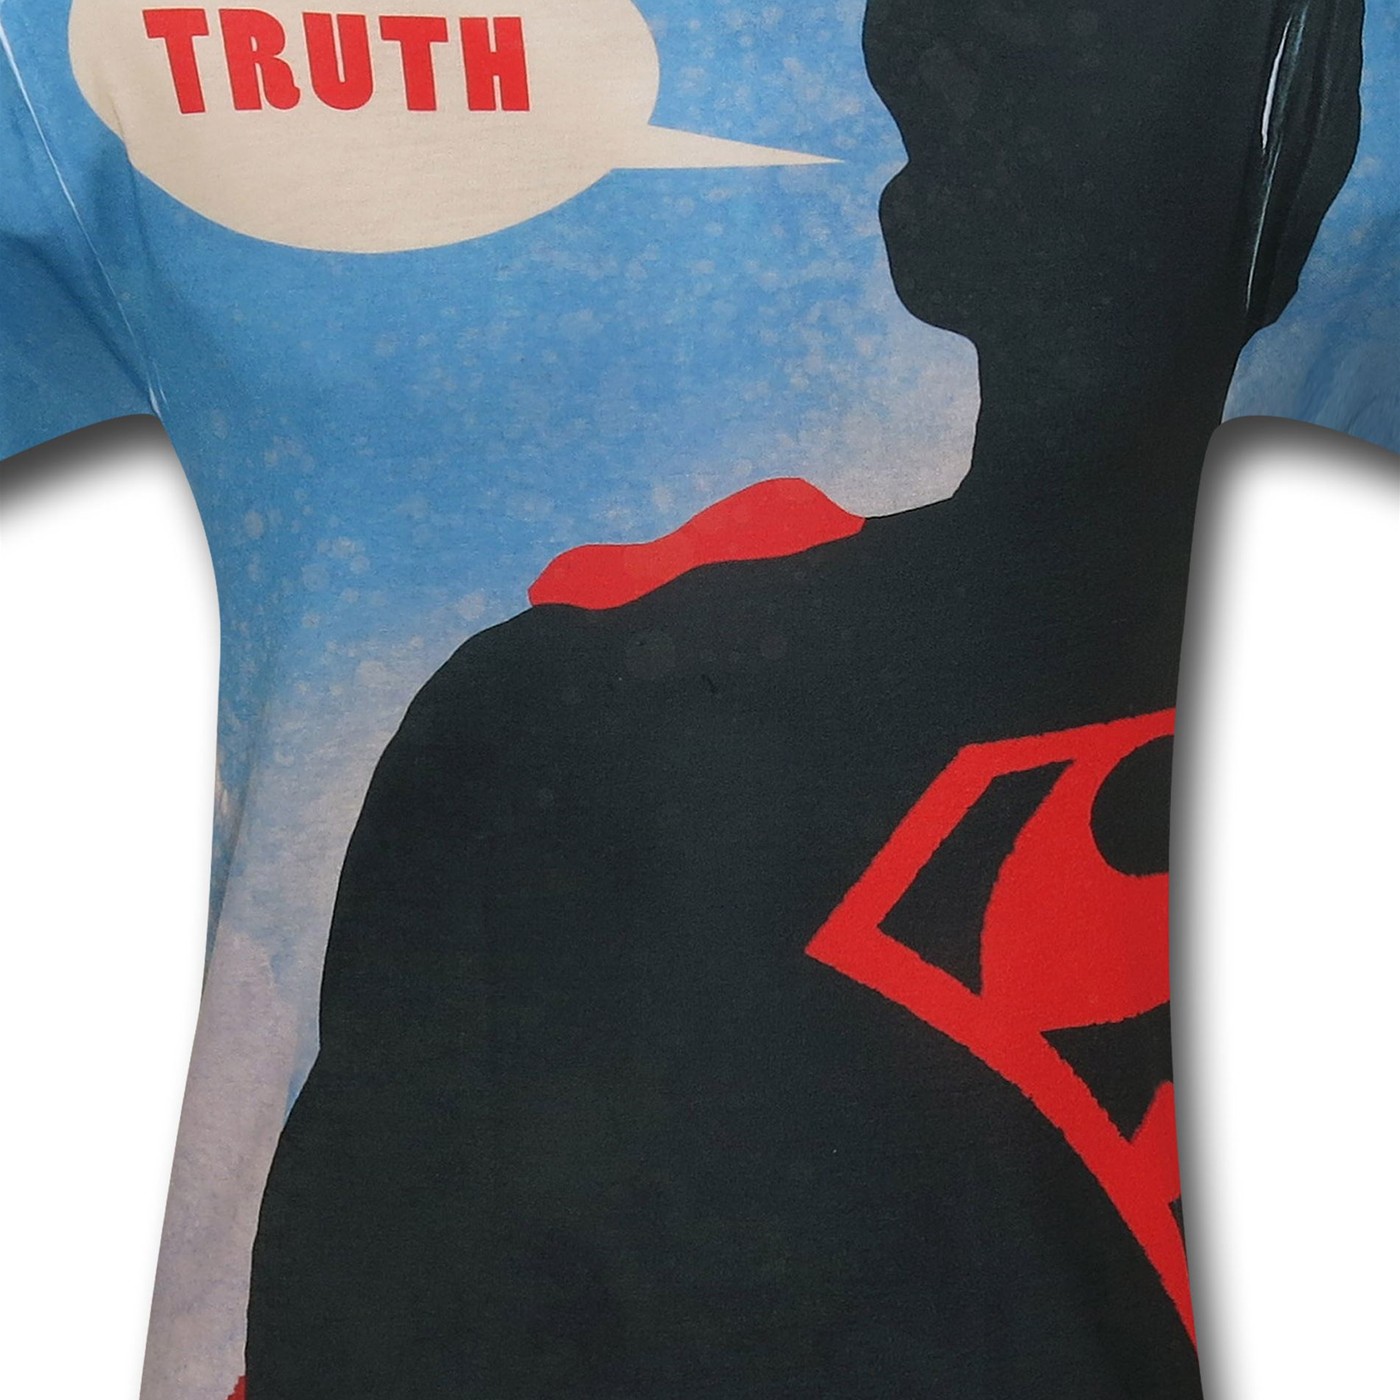 Superman Truth Sublimated T-Shirt